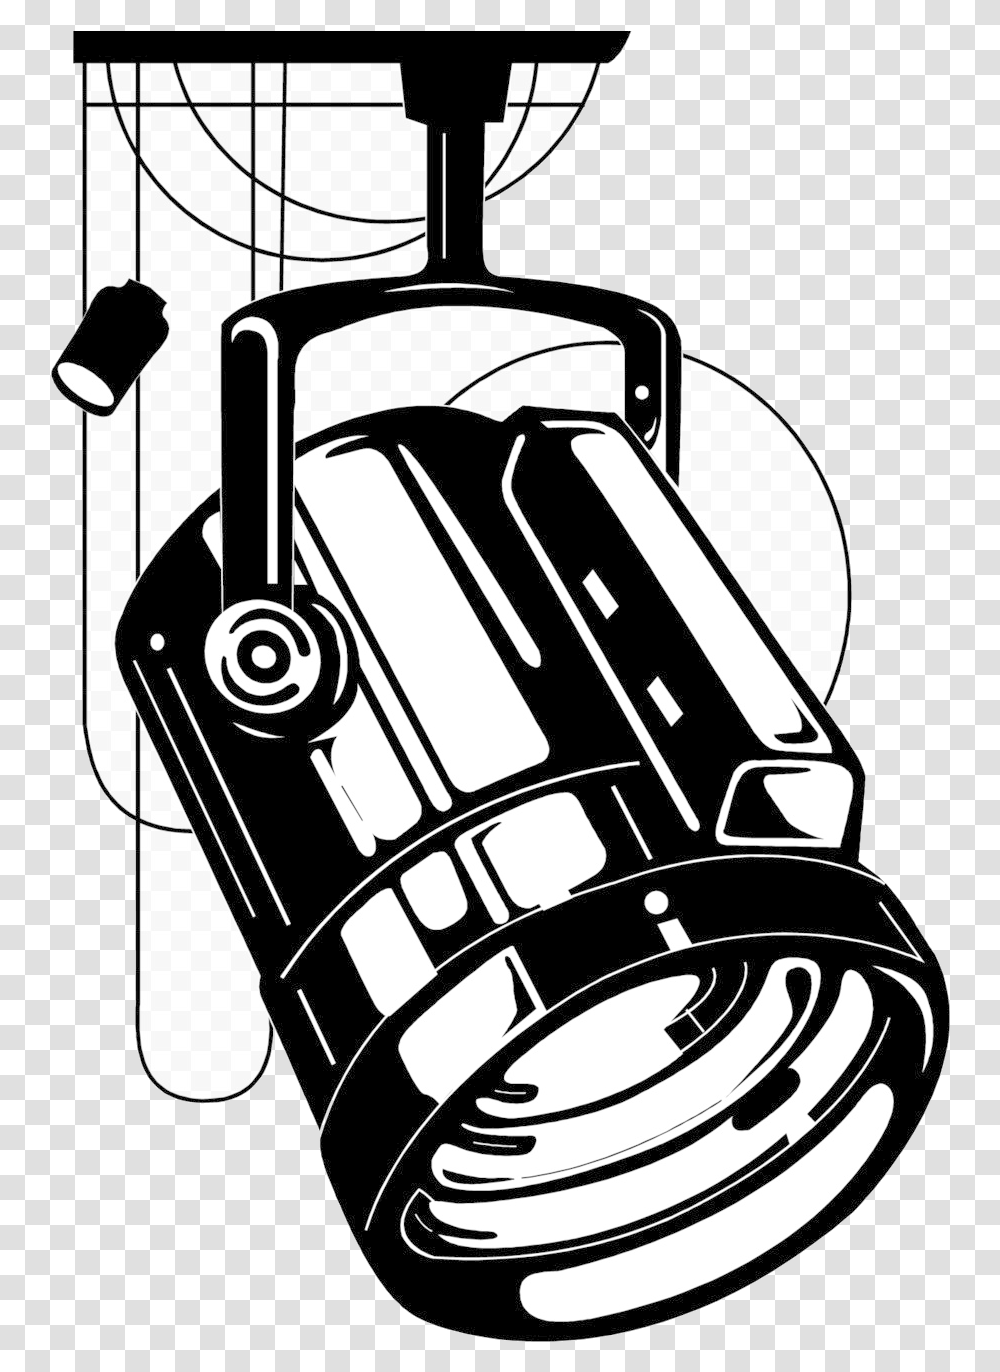 Stage Lights Light Clip Art Lighting Draw A Light Theatre, Grenade, Bomb, Weapon, Weaponry Transparent Png